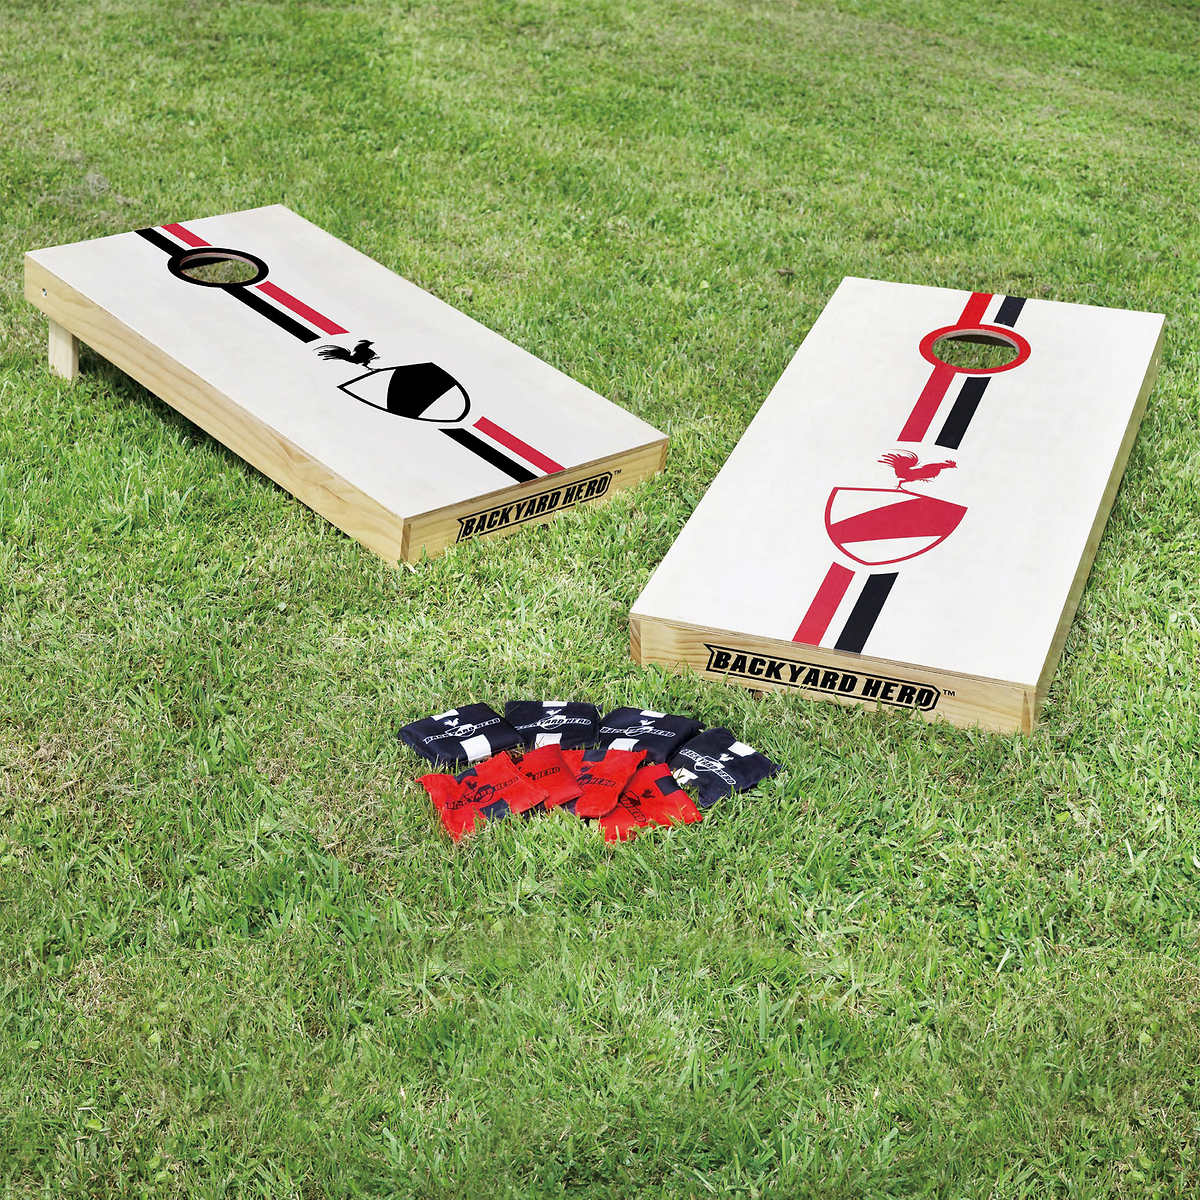 Washer Toss, Portable, Washers, Cornhole Boards, Portable Cornhole, Outdoor  Games, Games for Kids, Drinking Games, Games, Free Shipping 